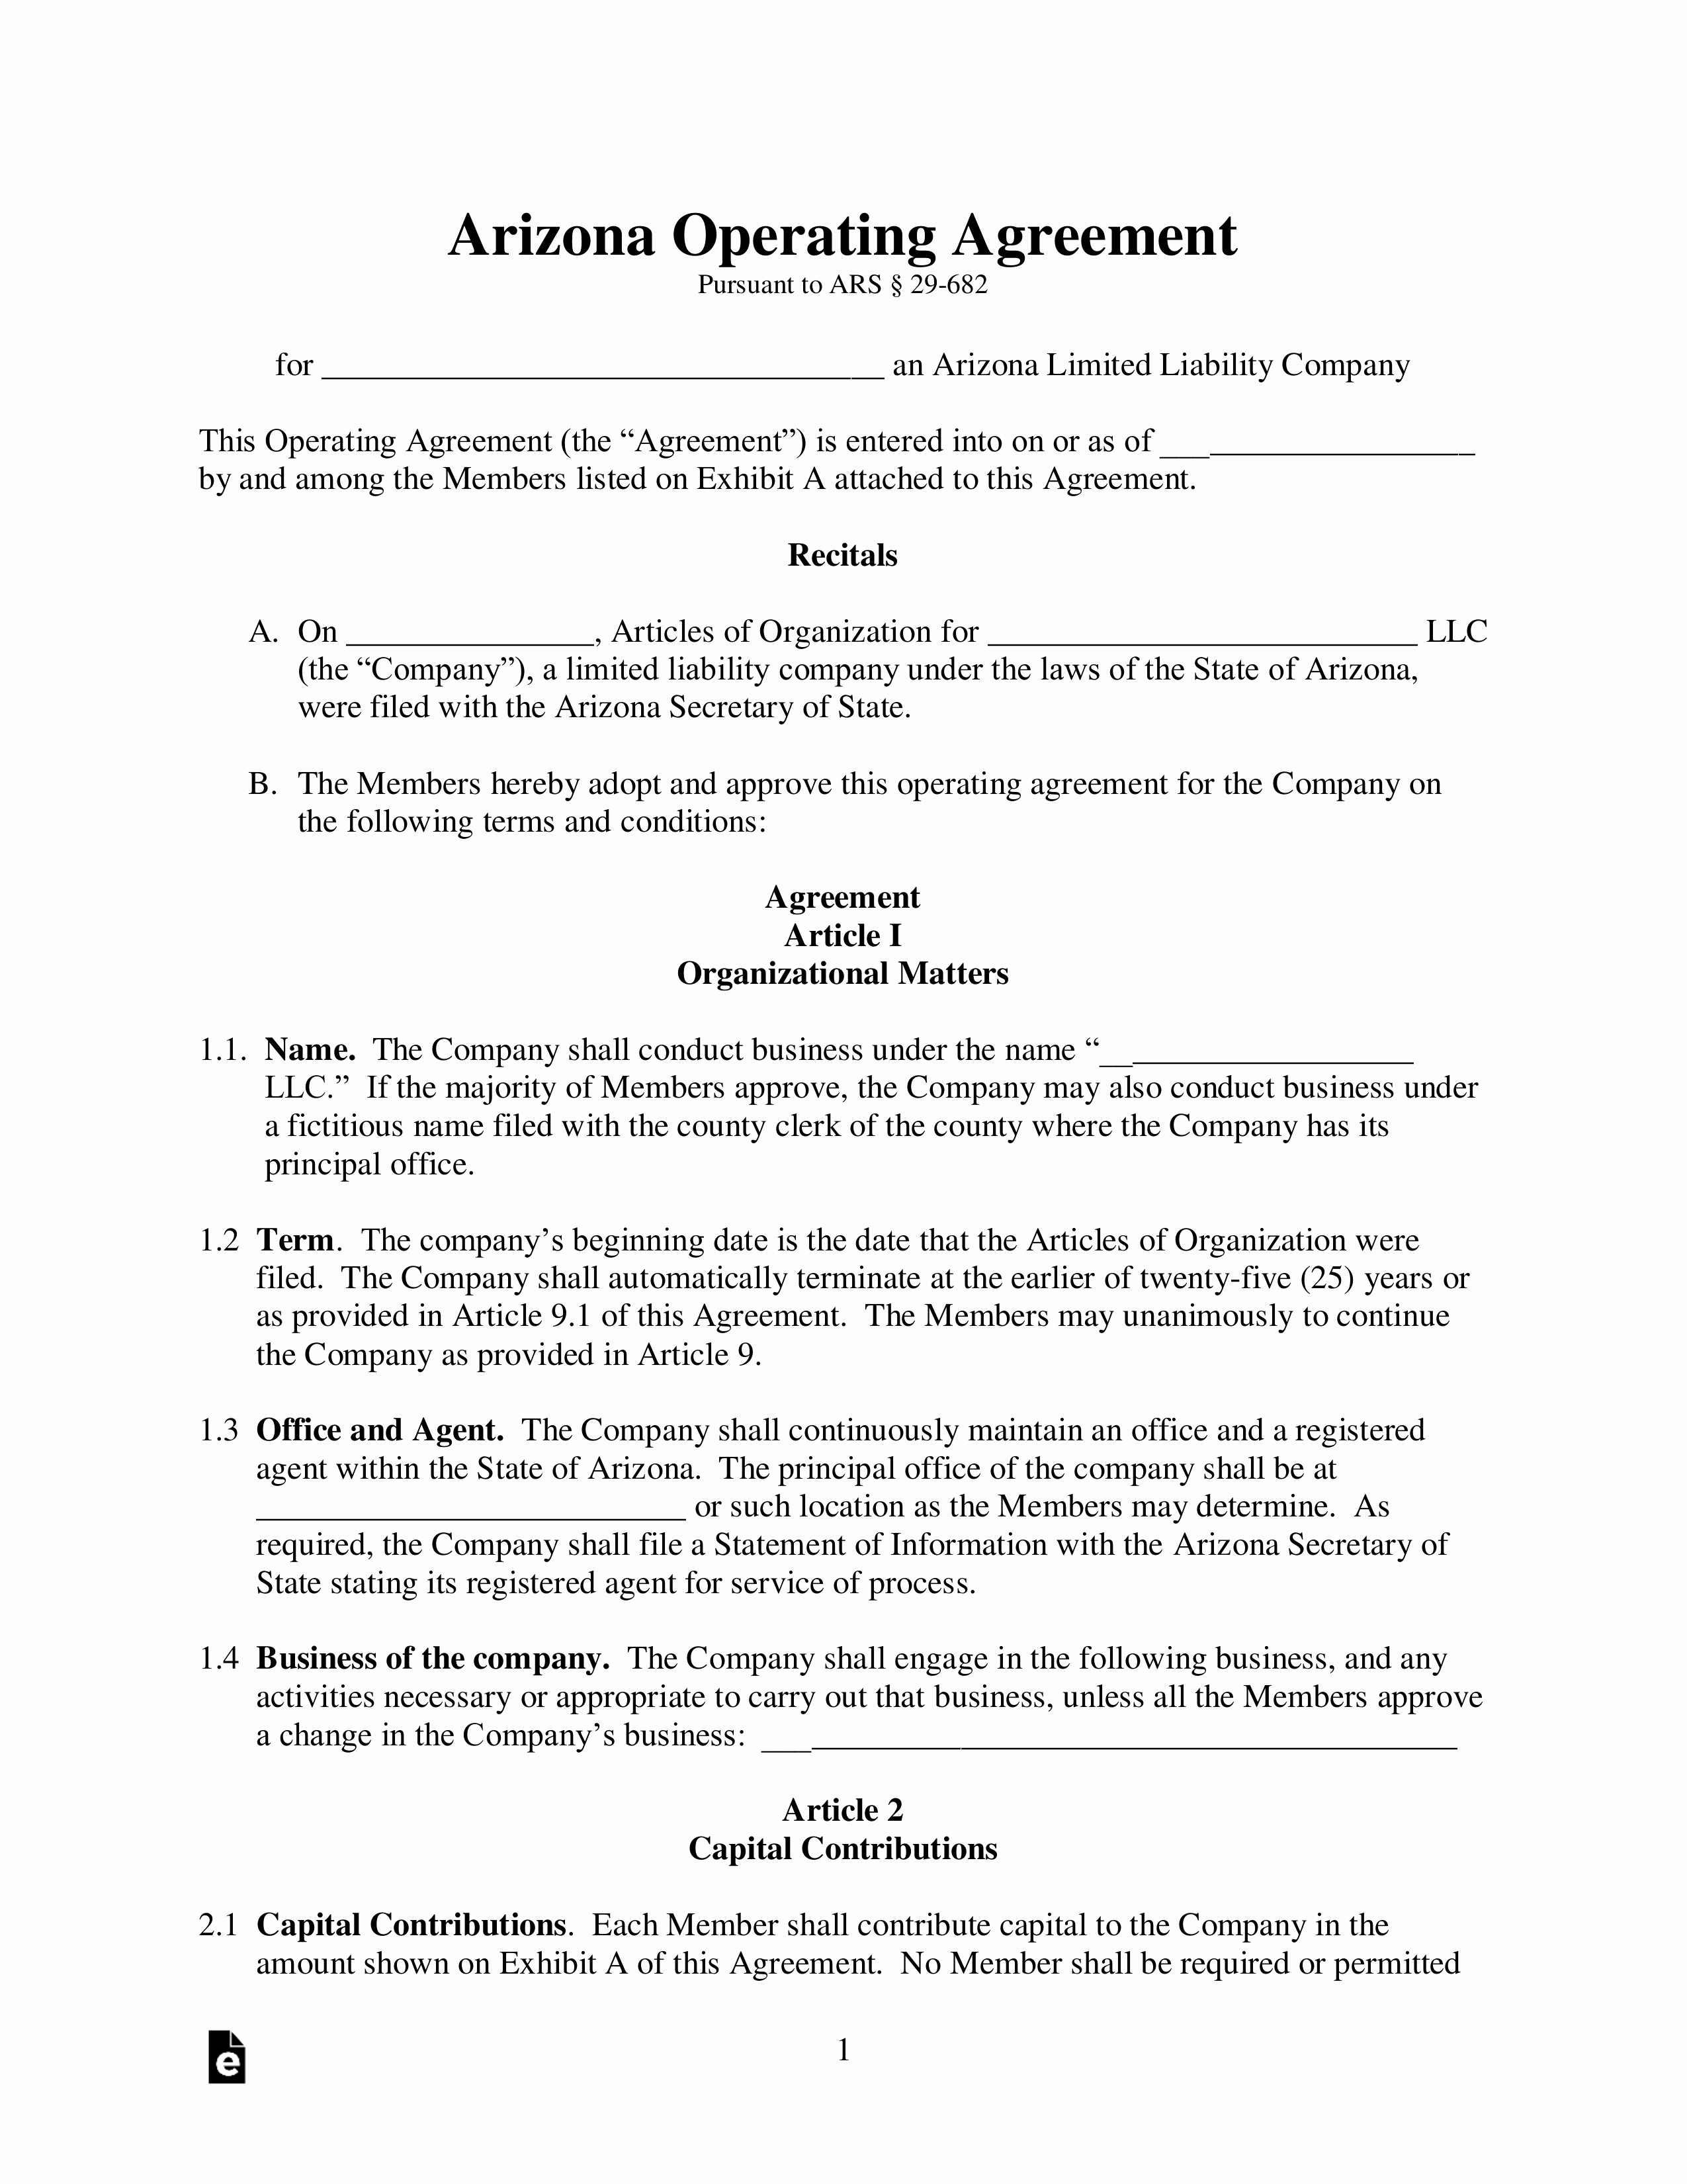 S Corp Operating Agreement Template Unique Free Arizona Llc Operating Agreement Templates Pdf